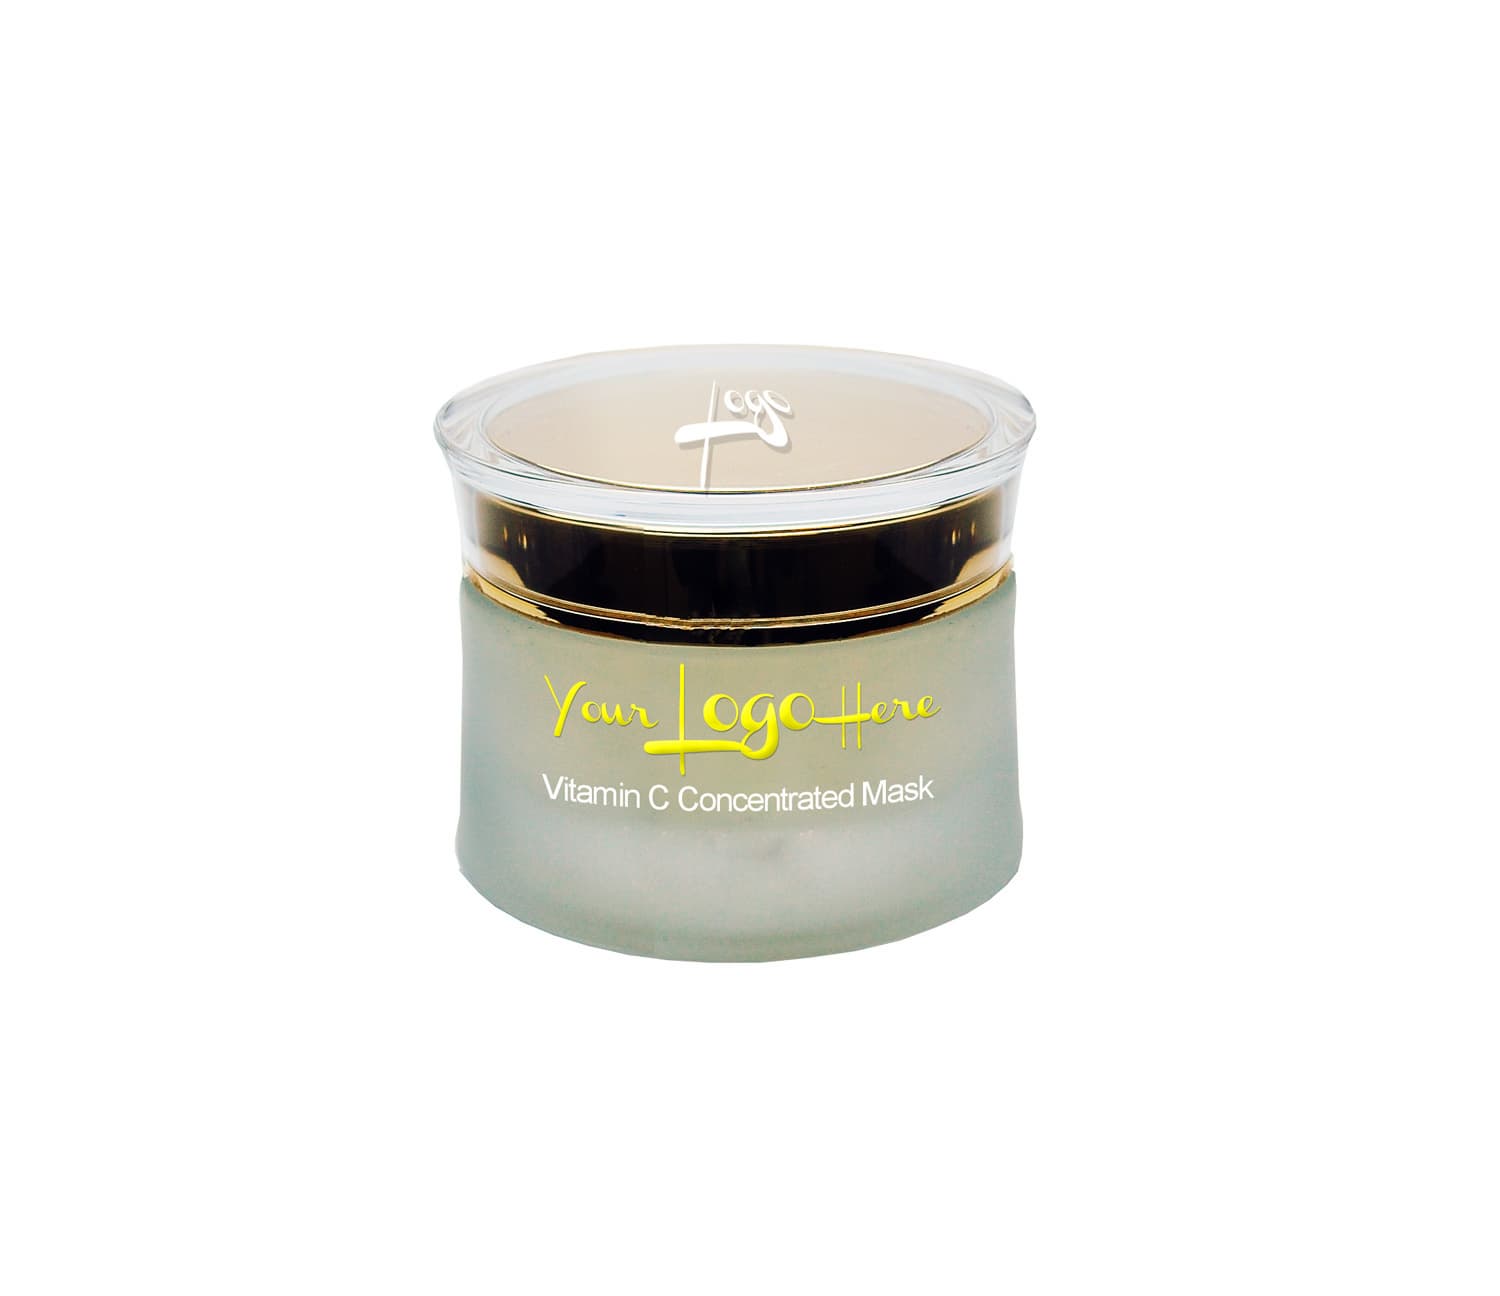 VITAMIN C CONCENTRATED MASK